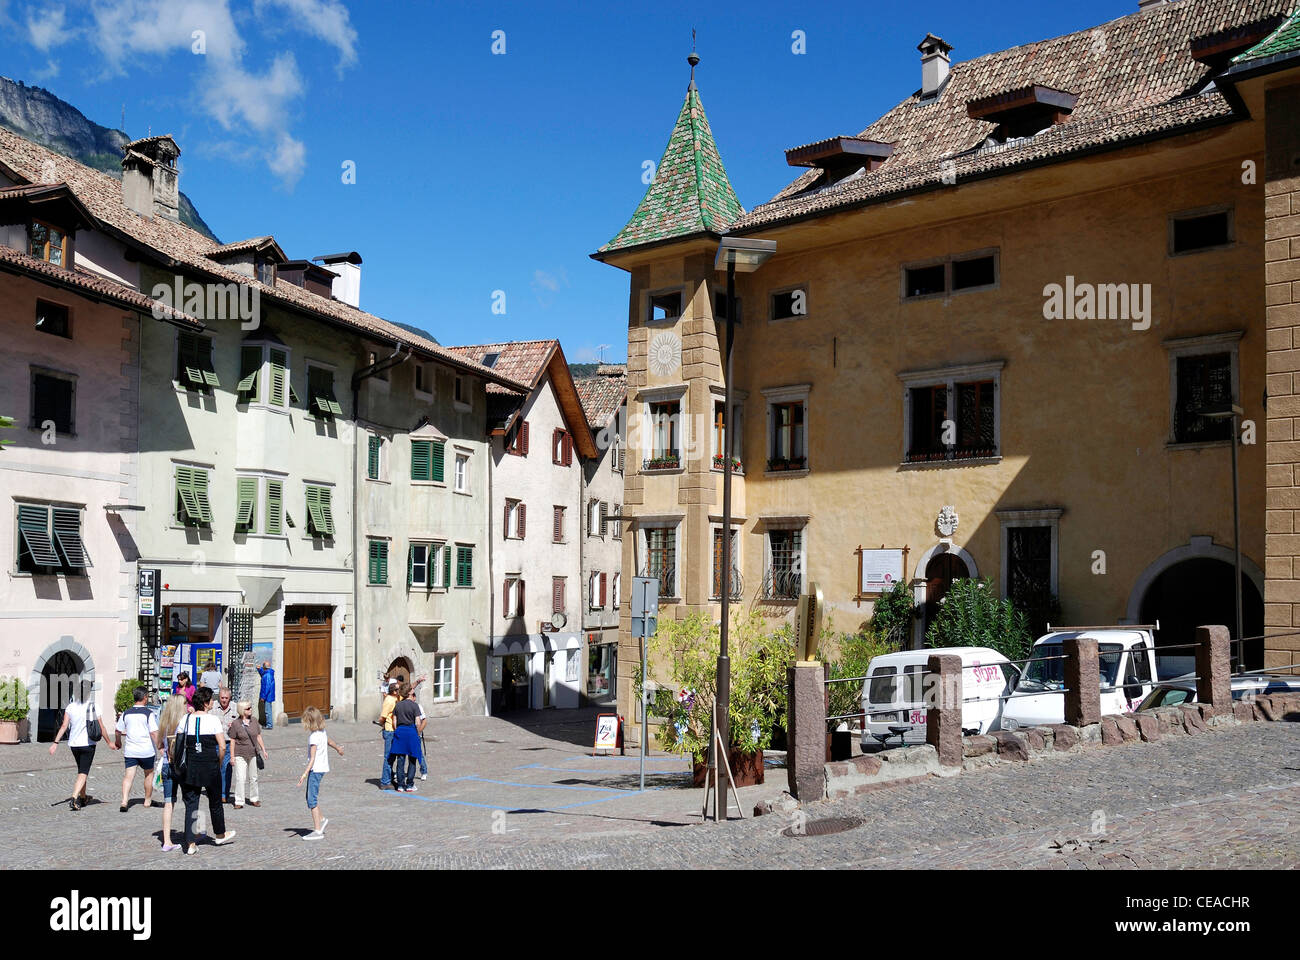 Downtown of Kaltern at the South Tyrolean wine route with houses from the 17th century. Stock Photo